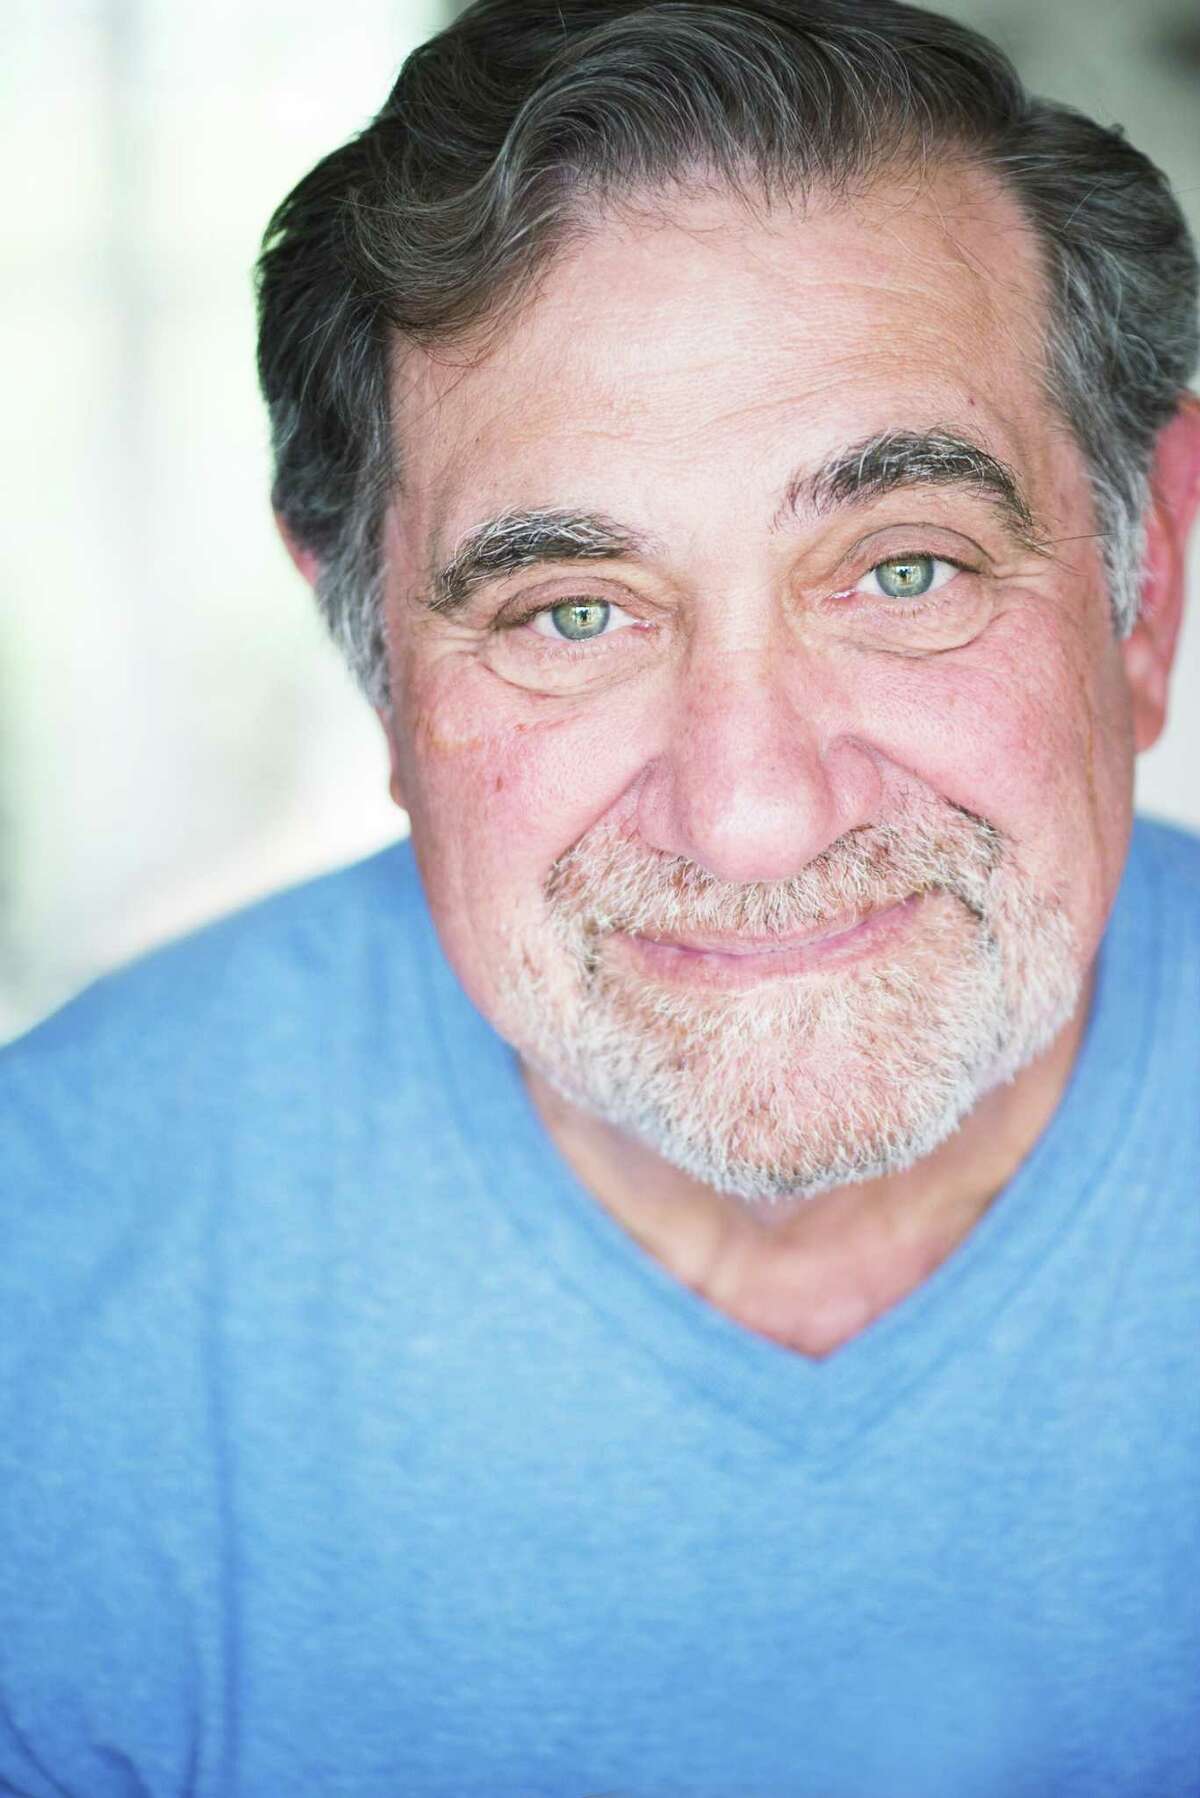 Dan Lauria attended Southern Connecticut State University.